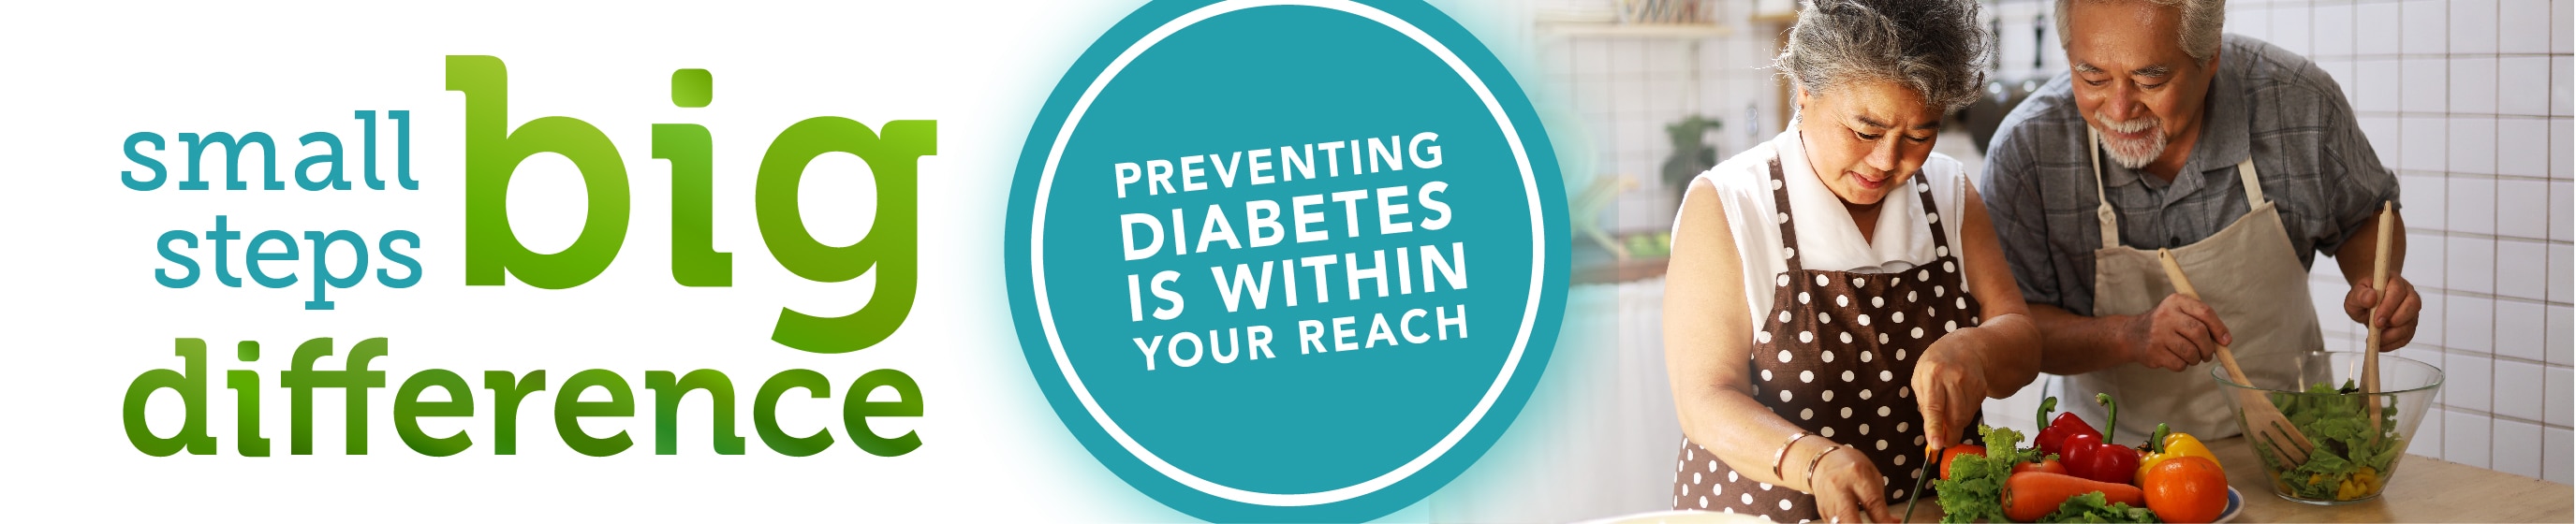 NDM Banner displaying "Small steps, big difference: preventing diabetes is within your reach."